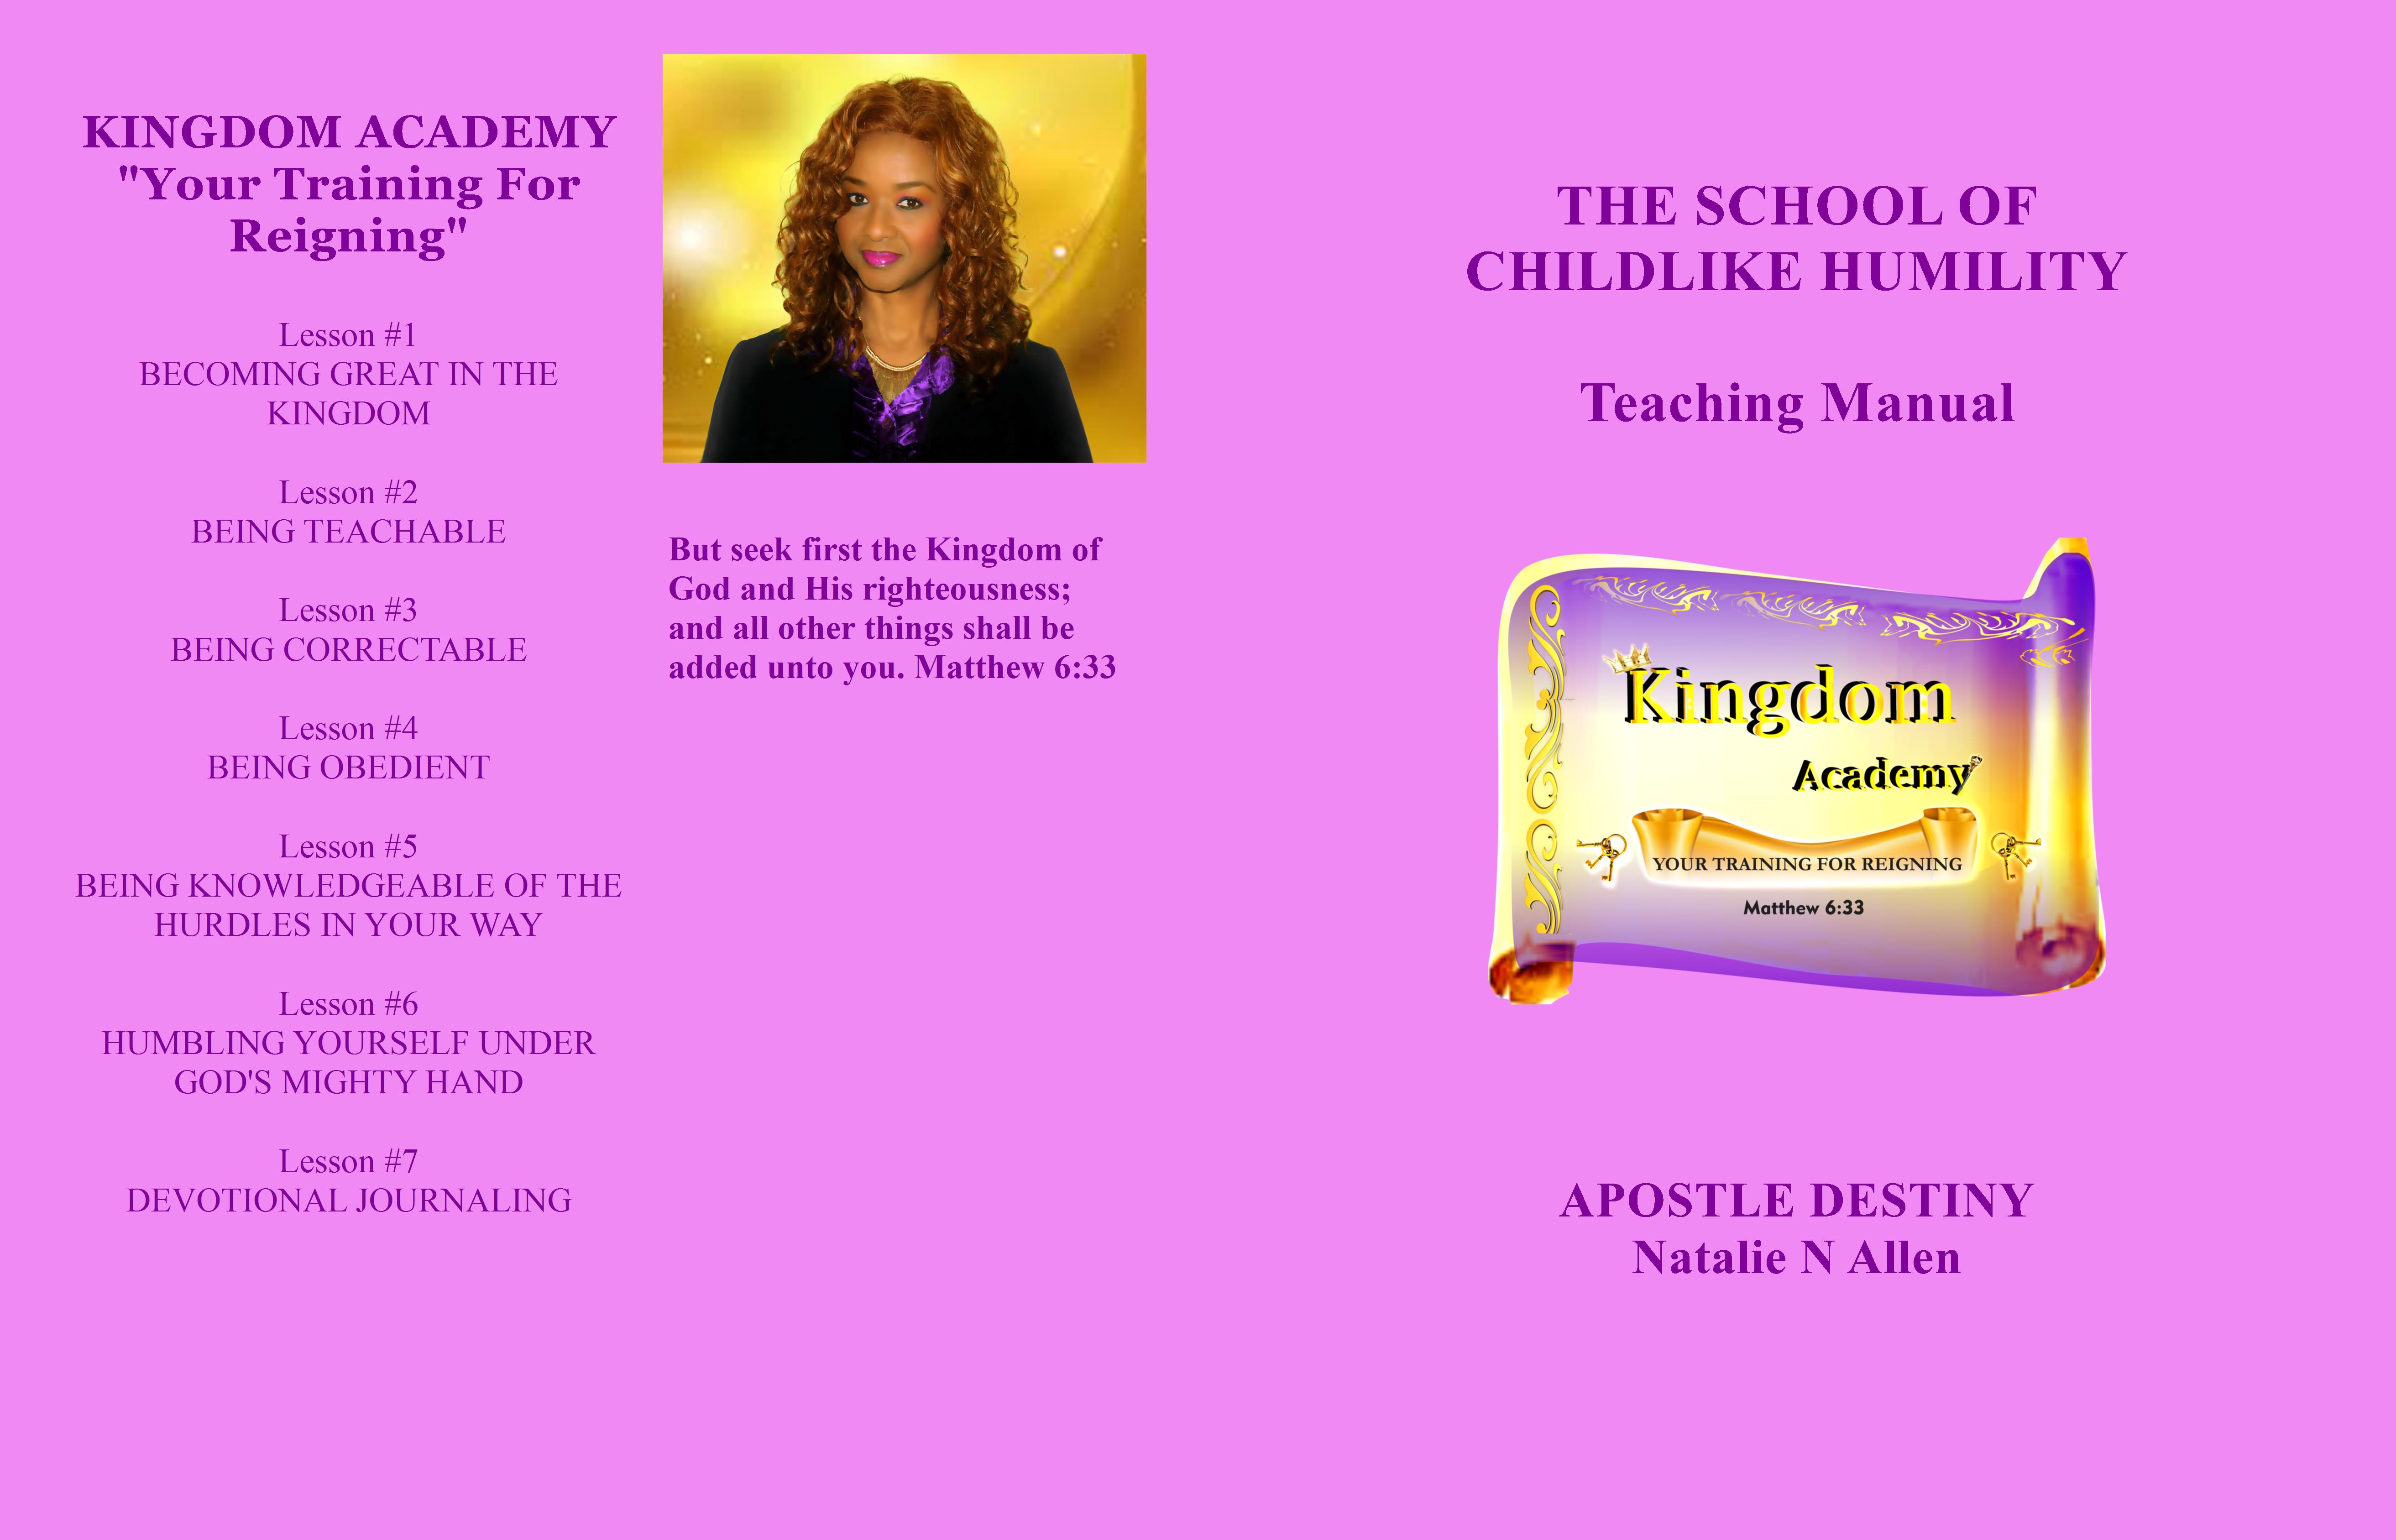 THE SCHOOL OF CHILDLIKE HUMILITY - TEACHING MANUAL cover image